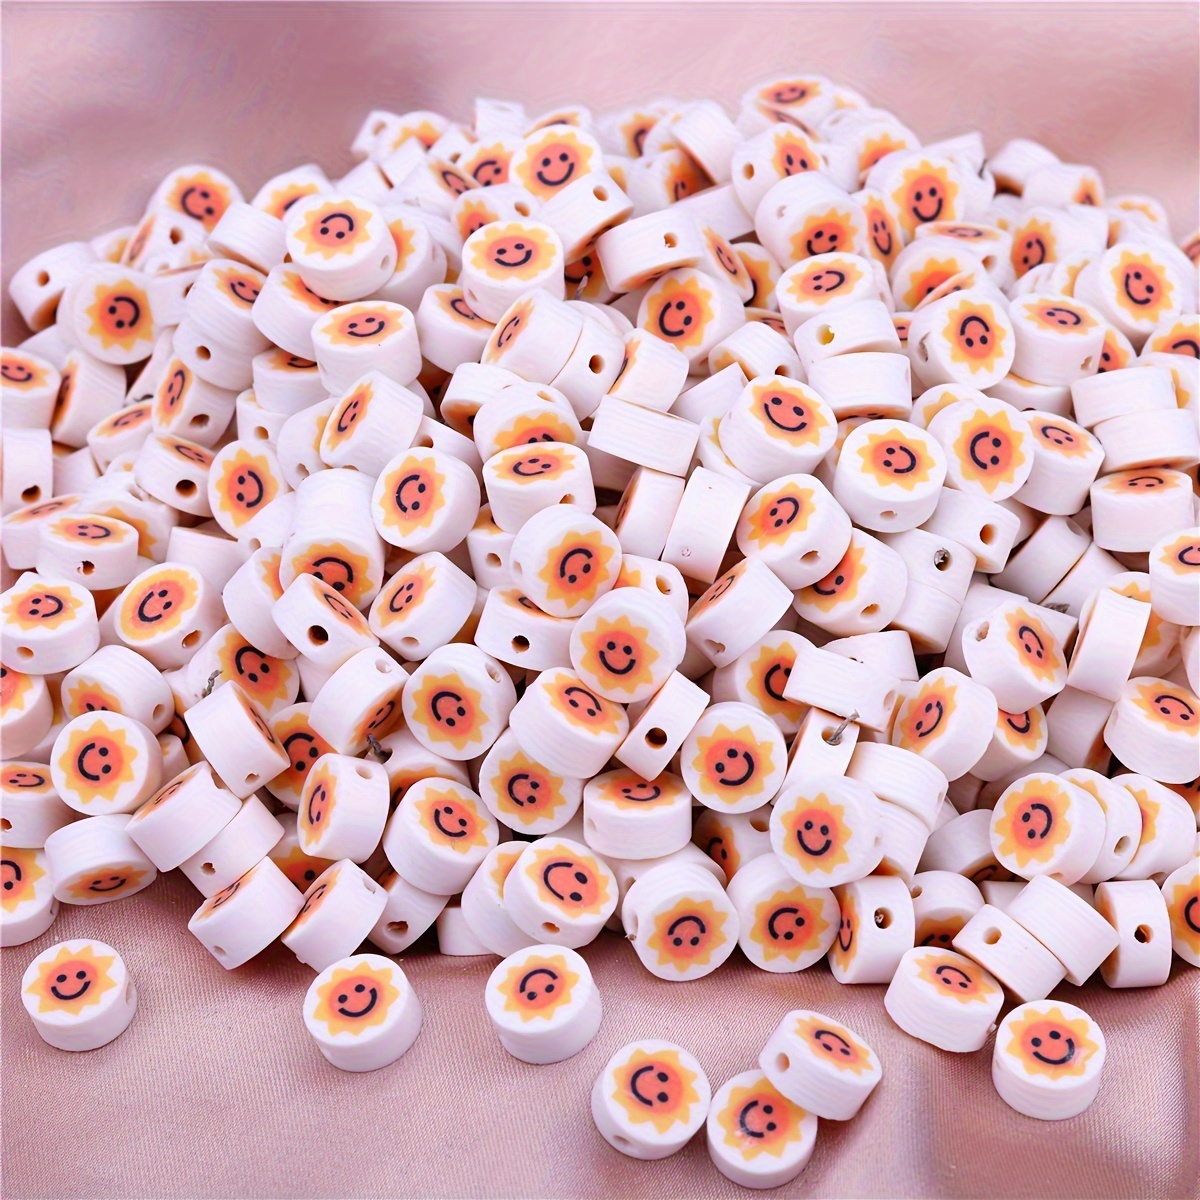 200pcs Smiley Face Polymer Clay Beads Charms for Bracelet Necklace Jewelry  Making (Smiley Face)